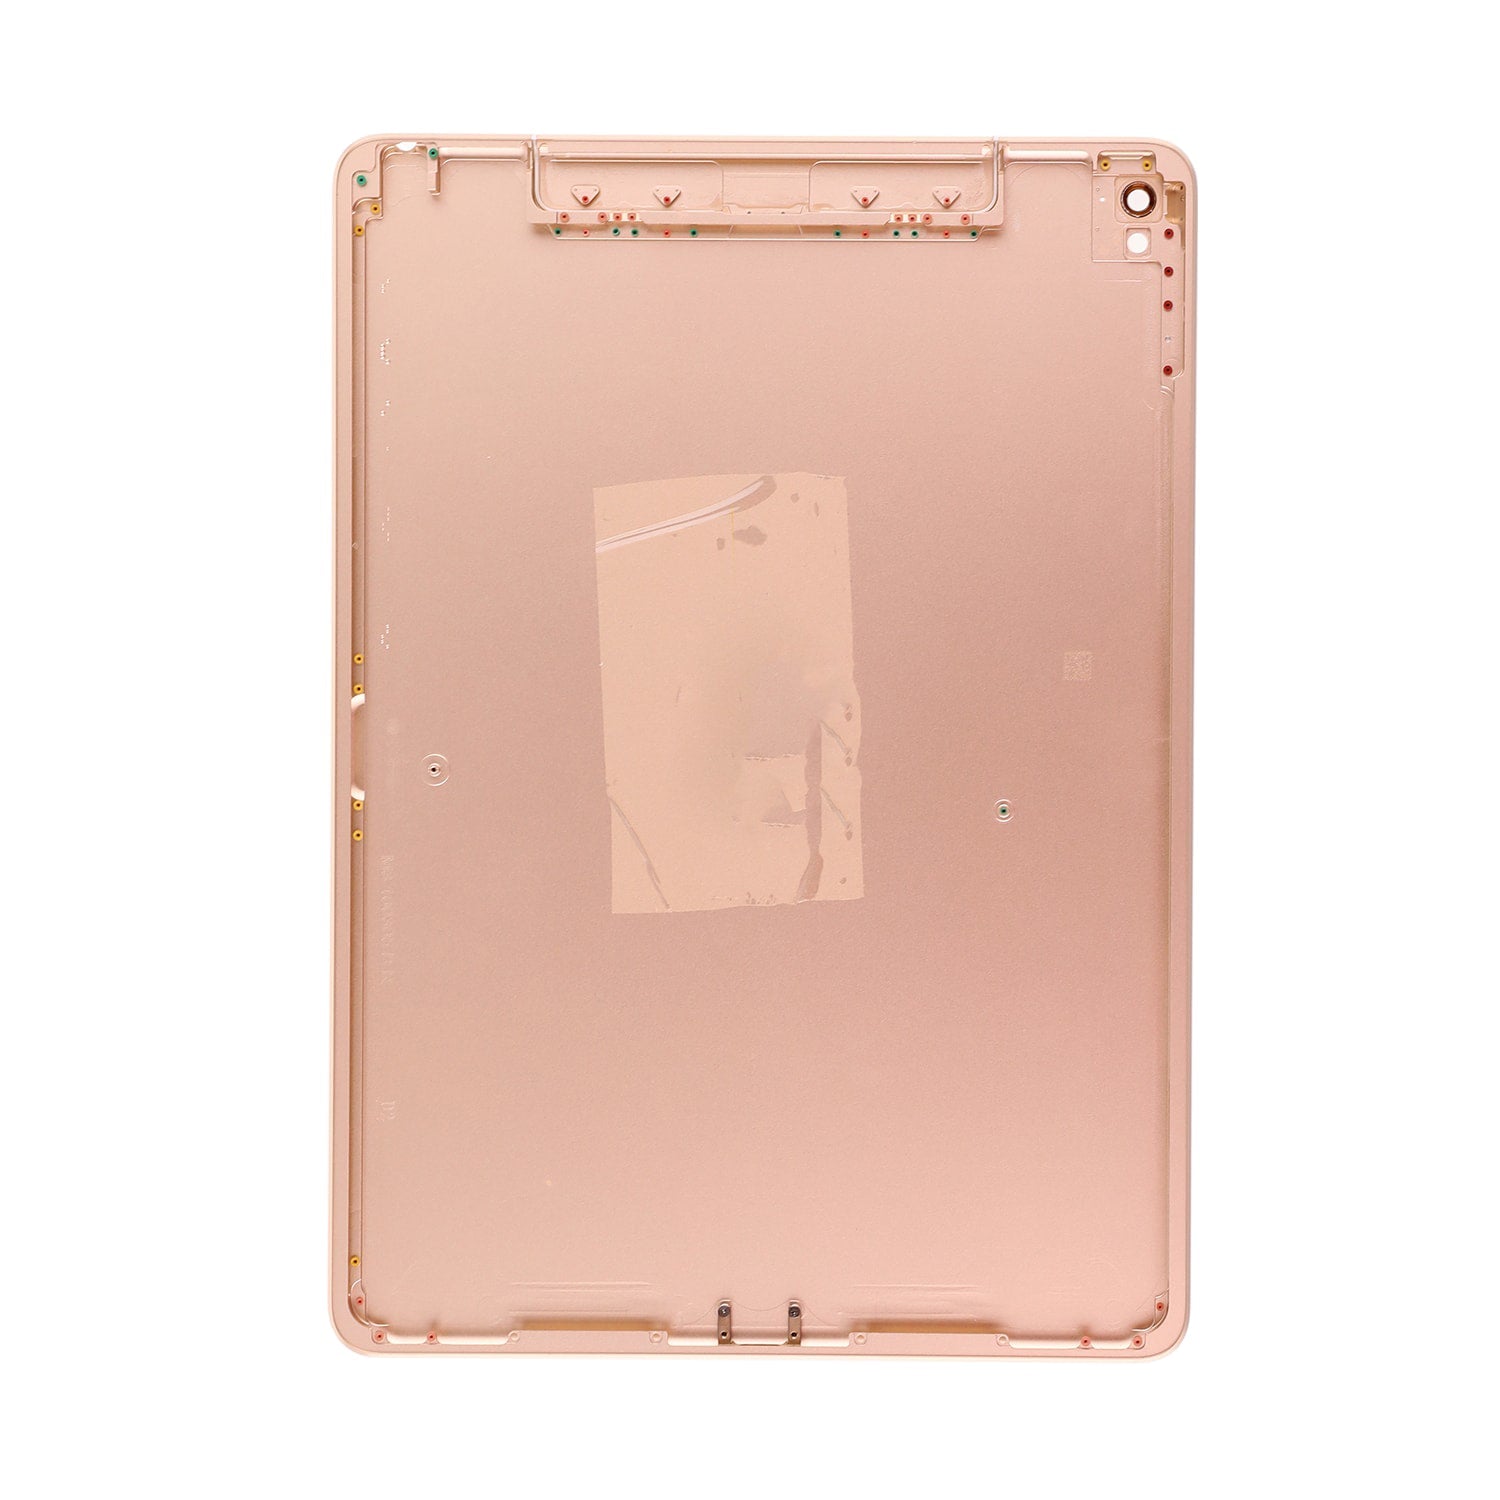 BACK COVER WIFI + CELLULAR VERSION FOR IPAD PRO 9.7"- GOLD